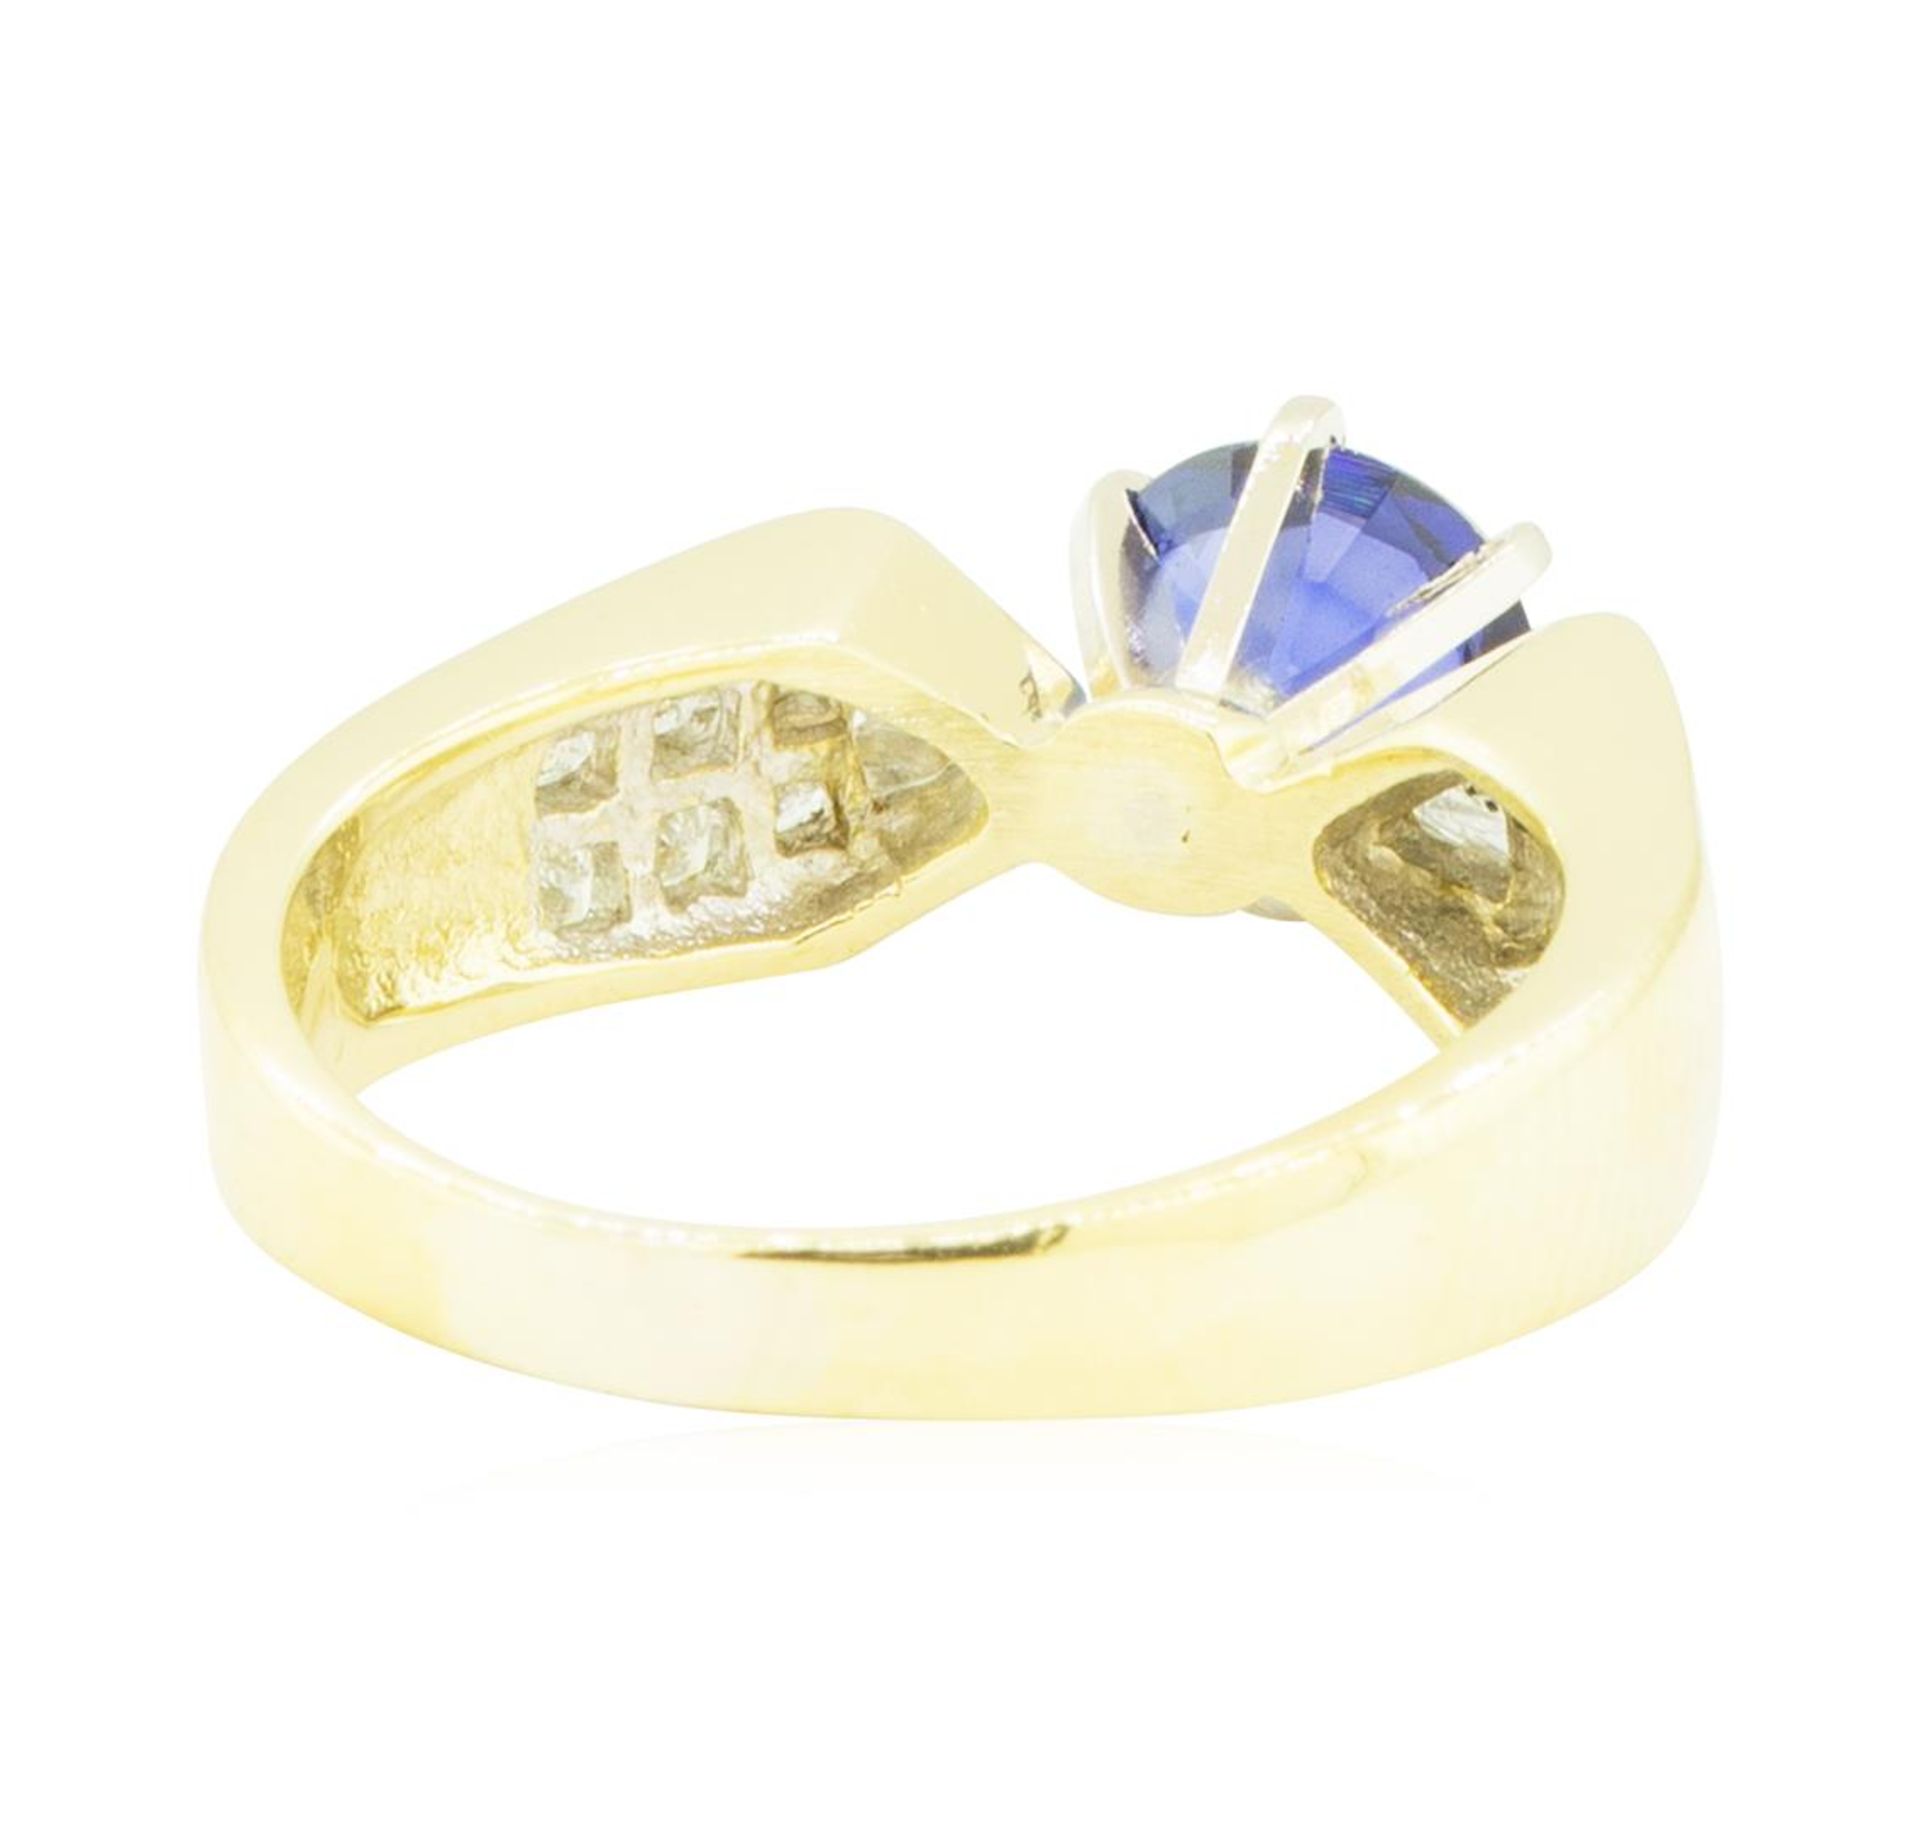 2.20 ctw Blue Sapphire and Diamond Ring - 18KT Yellow Gold - Image 3 of 4